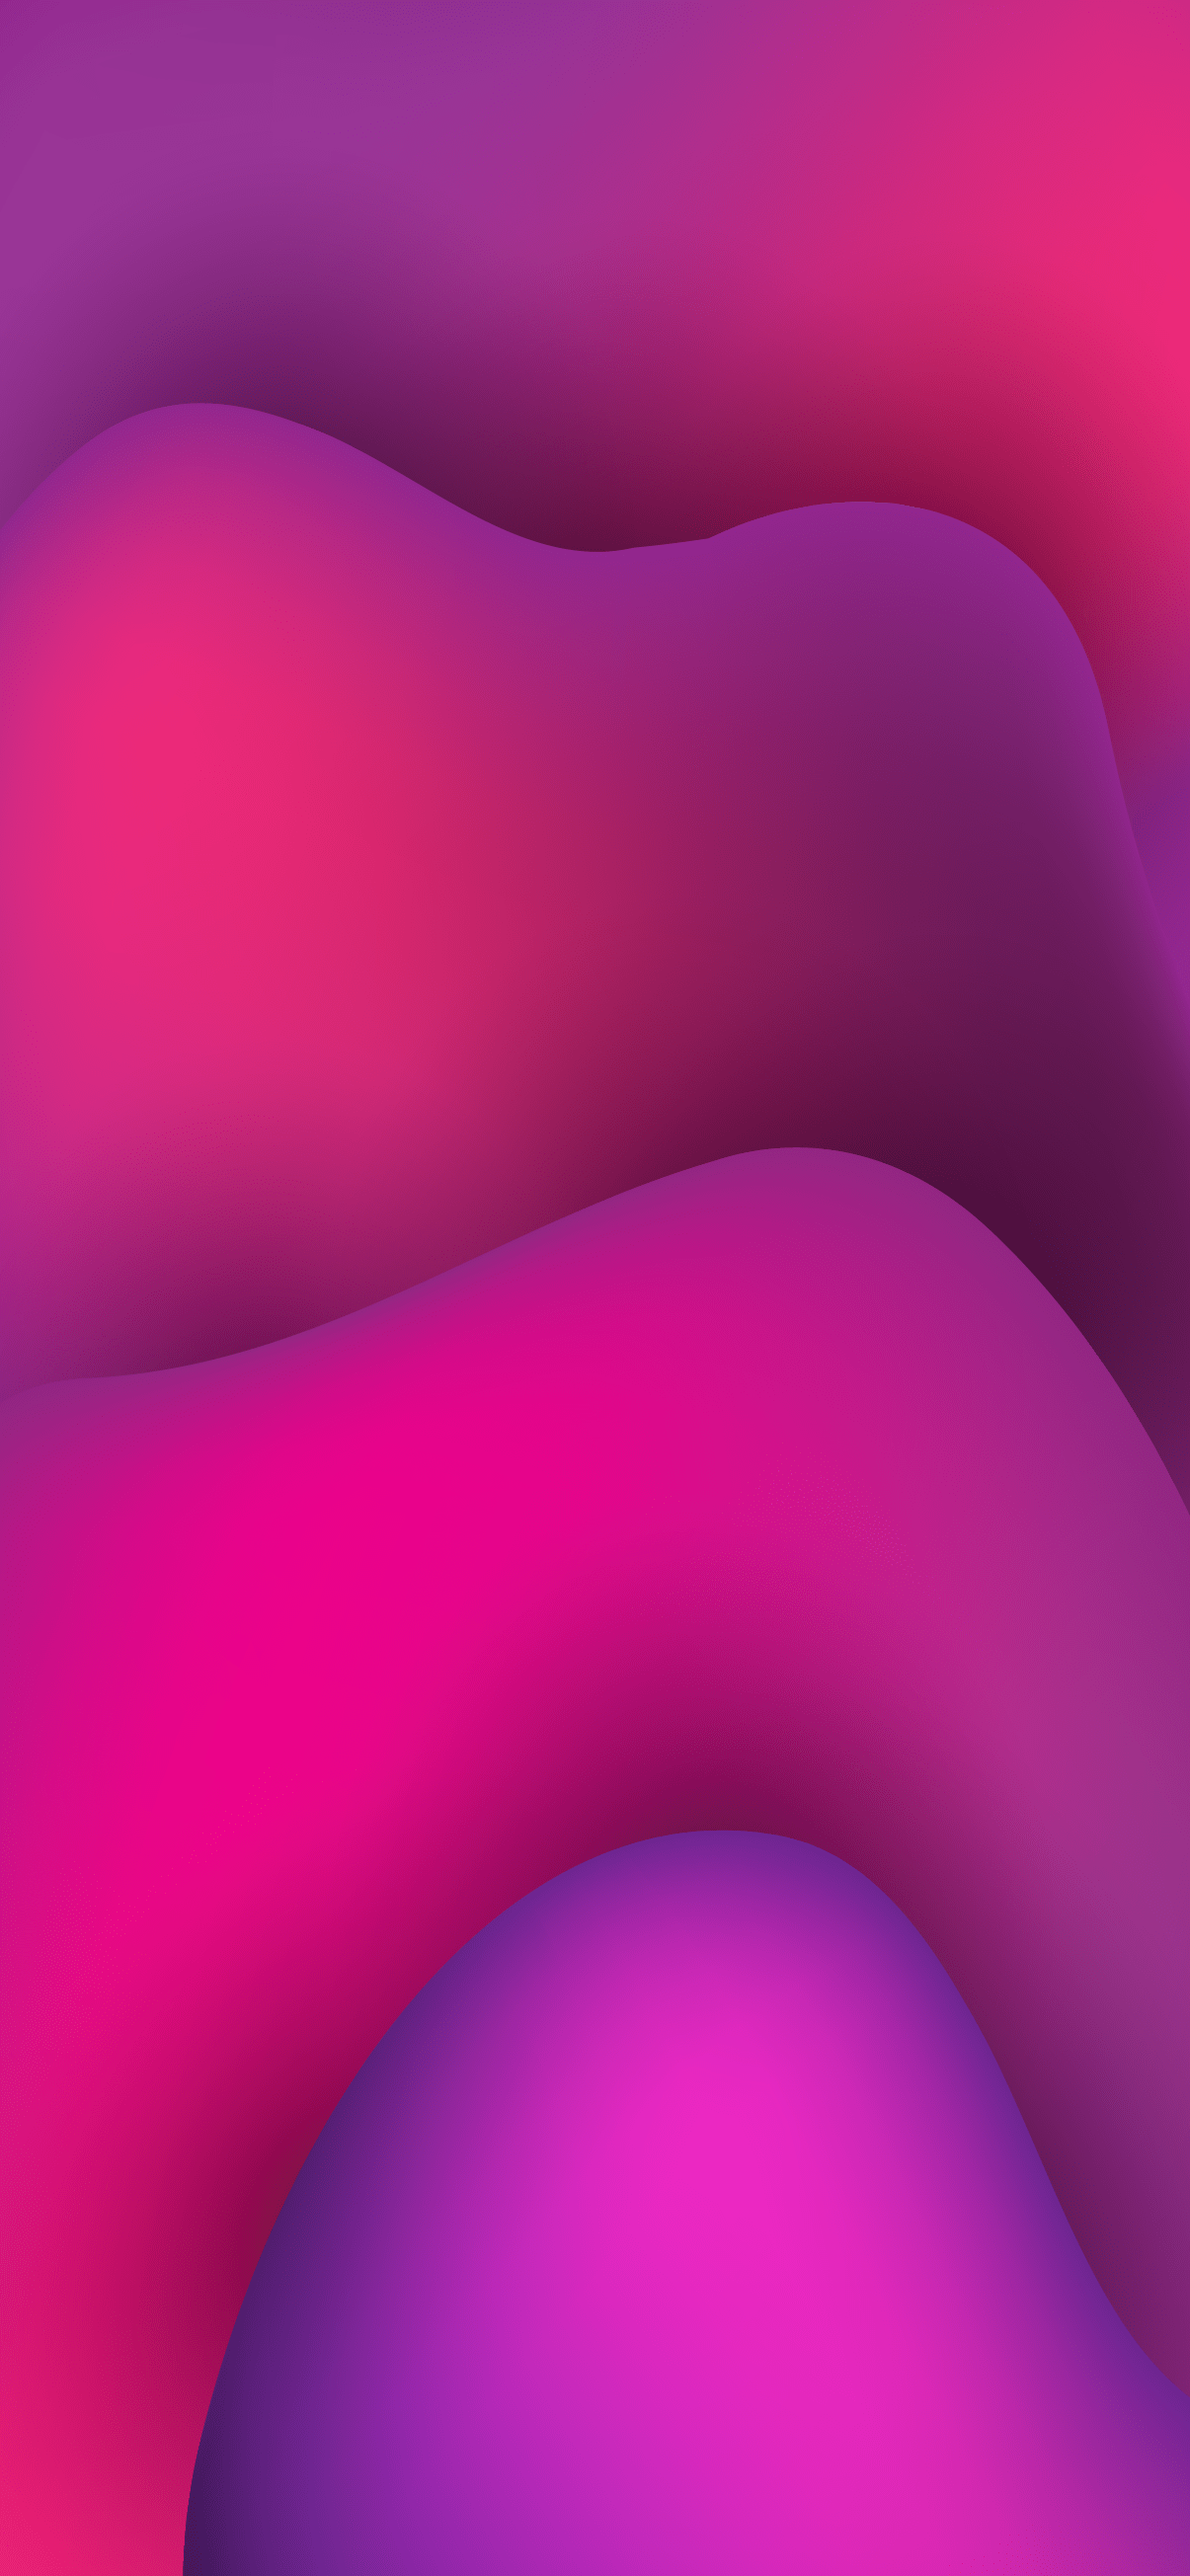 Aesthetic abstract iphone wallpaper